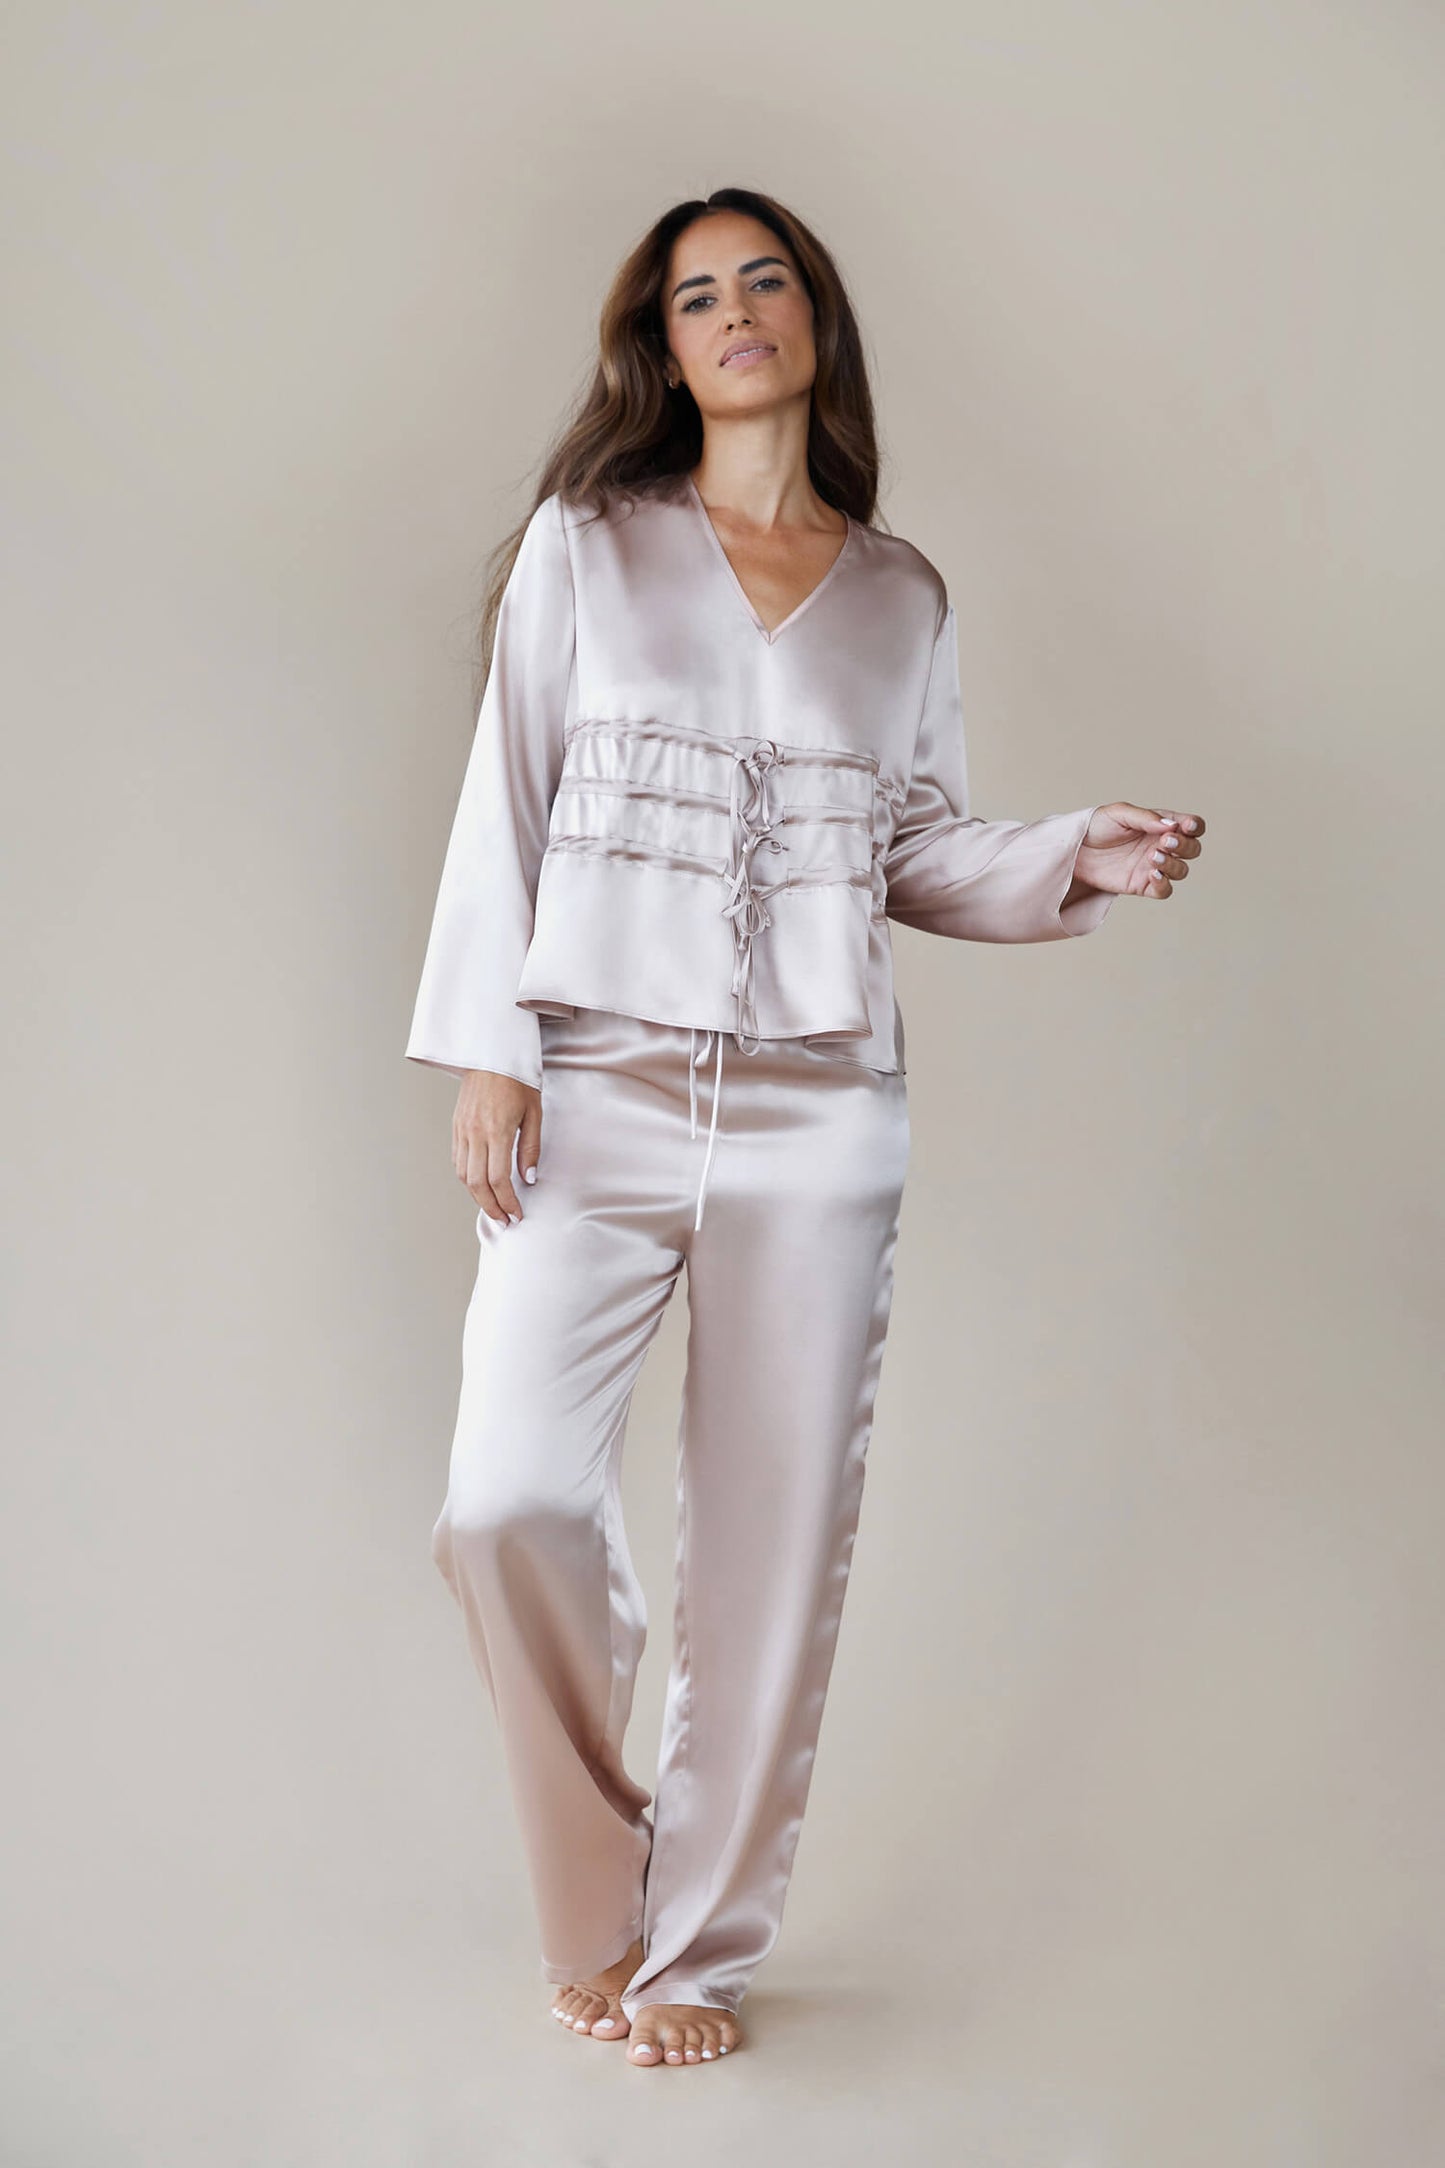  Model wears silk satin loungewear set in colour rose fawn. Her top is a long sleeved, V neck top. It is shown with the waist ties untied to give a loose, easy fit rather than the corseted style waist. She wears straight legged pyjama style silk trousers with a drawstring, elasticated waist. 